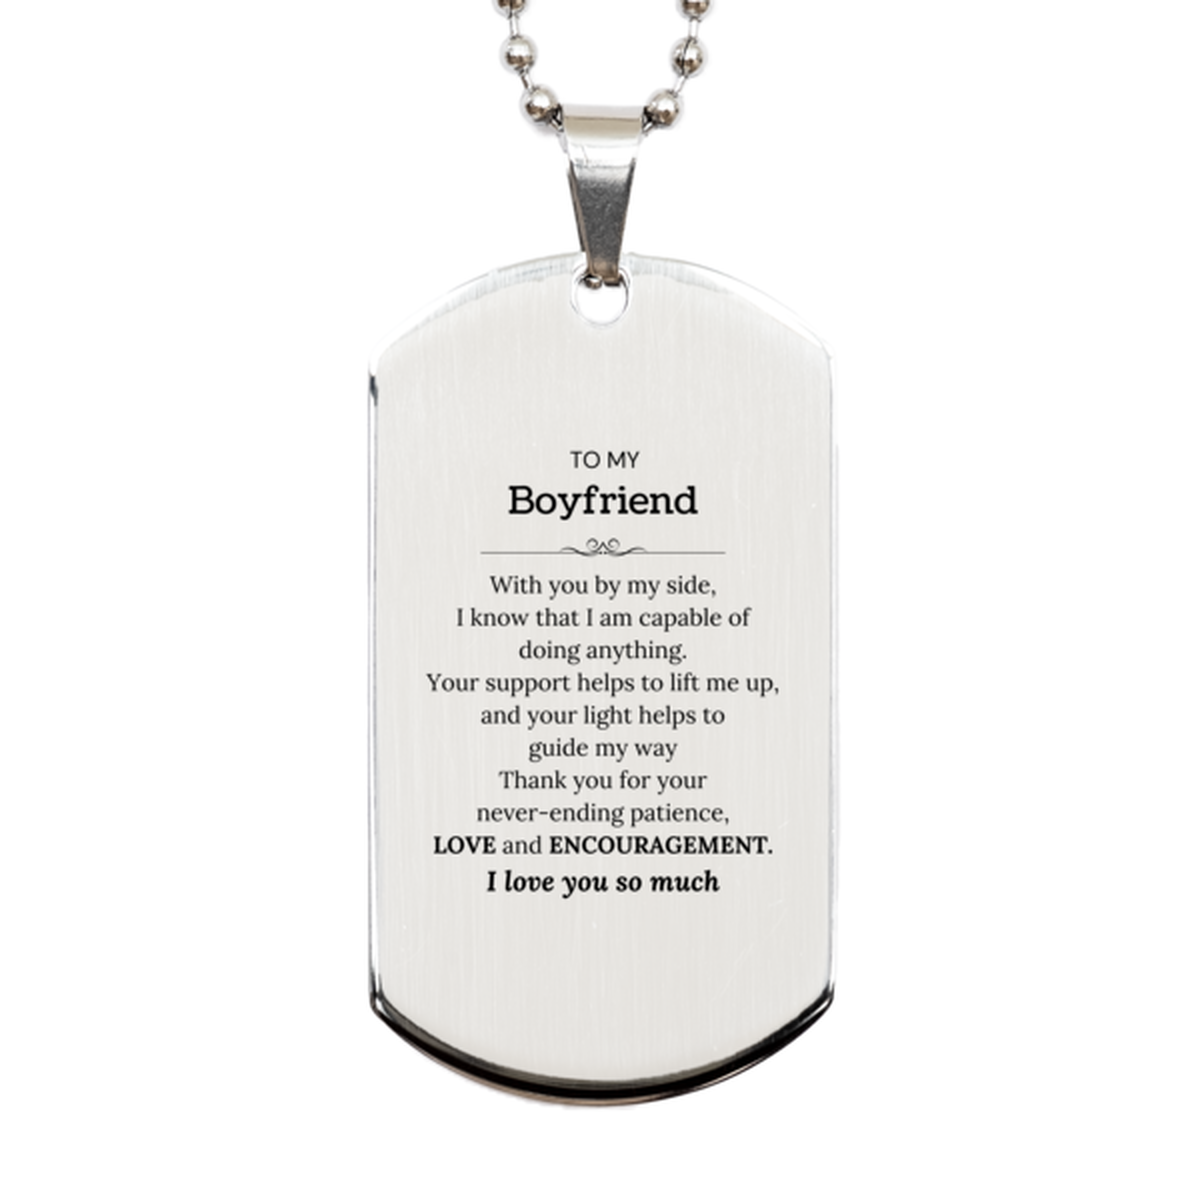 Appreciation Boyfriend Silver Dog Tag Gifts, To My Boyfriend Birthday Christmas Wedding Keepsake Gifts for Boyfriend With you by my side, I know that I am capable of doing anything. I love you so much